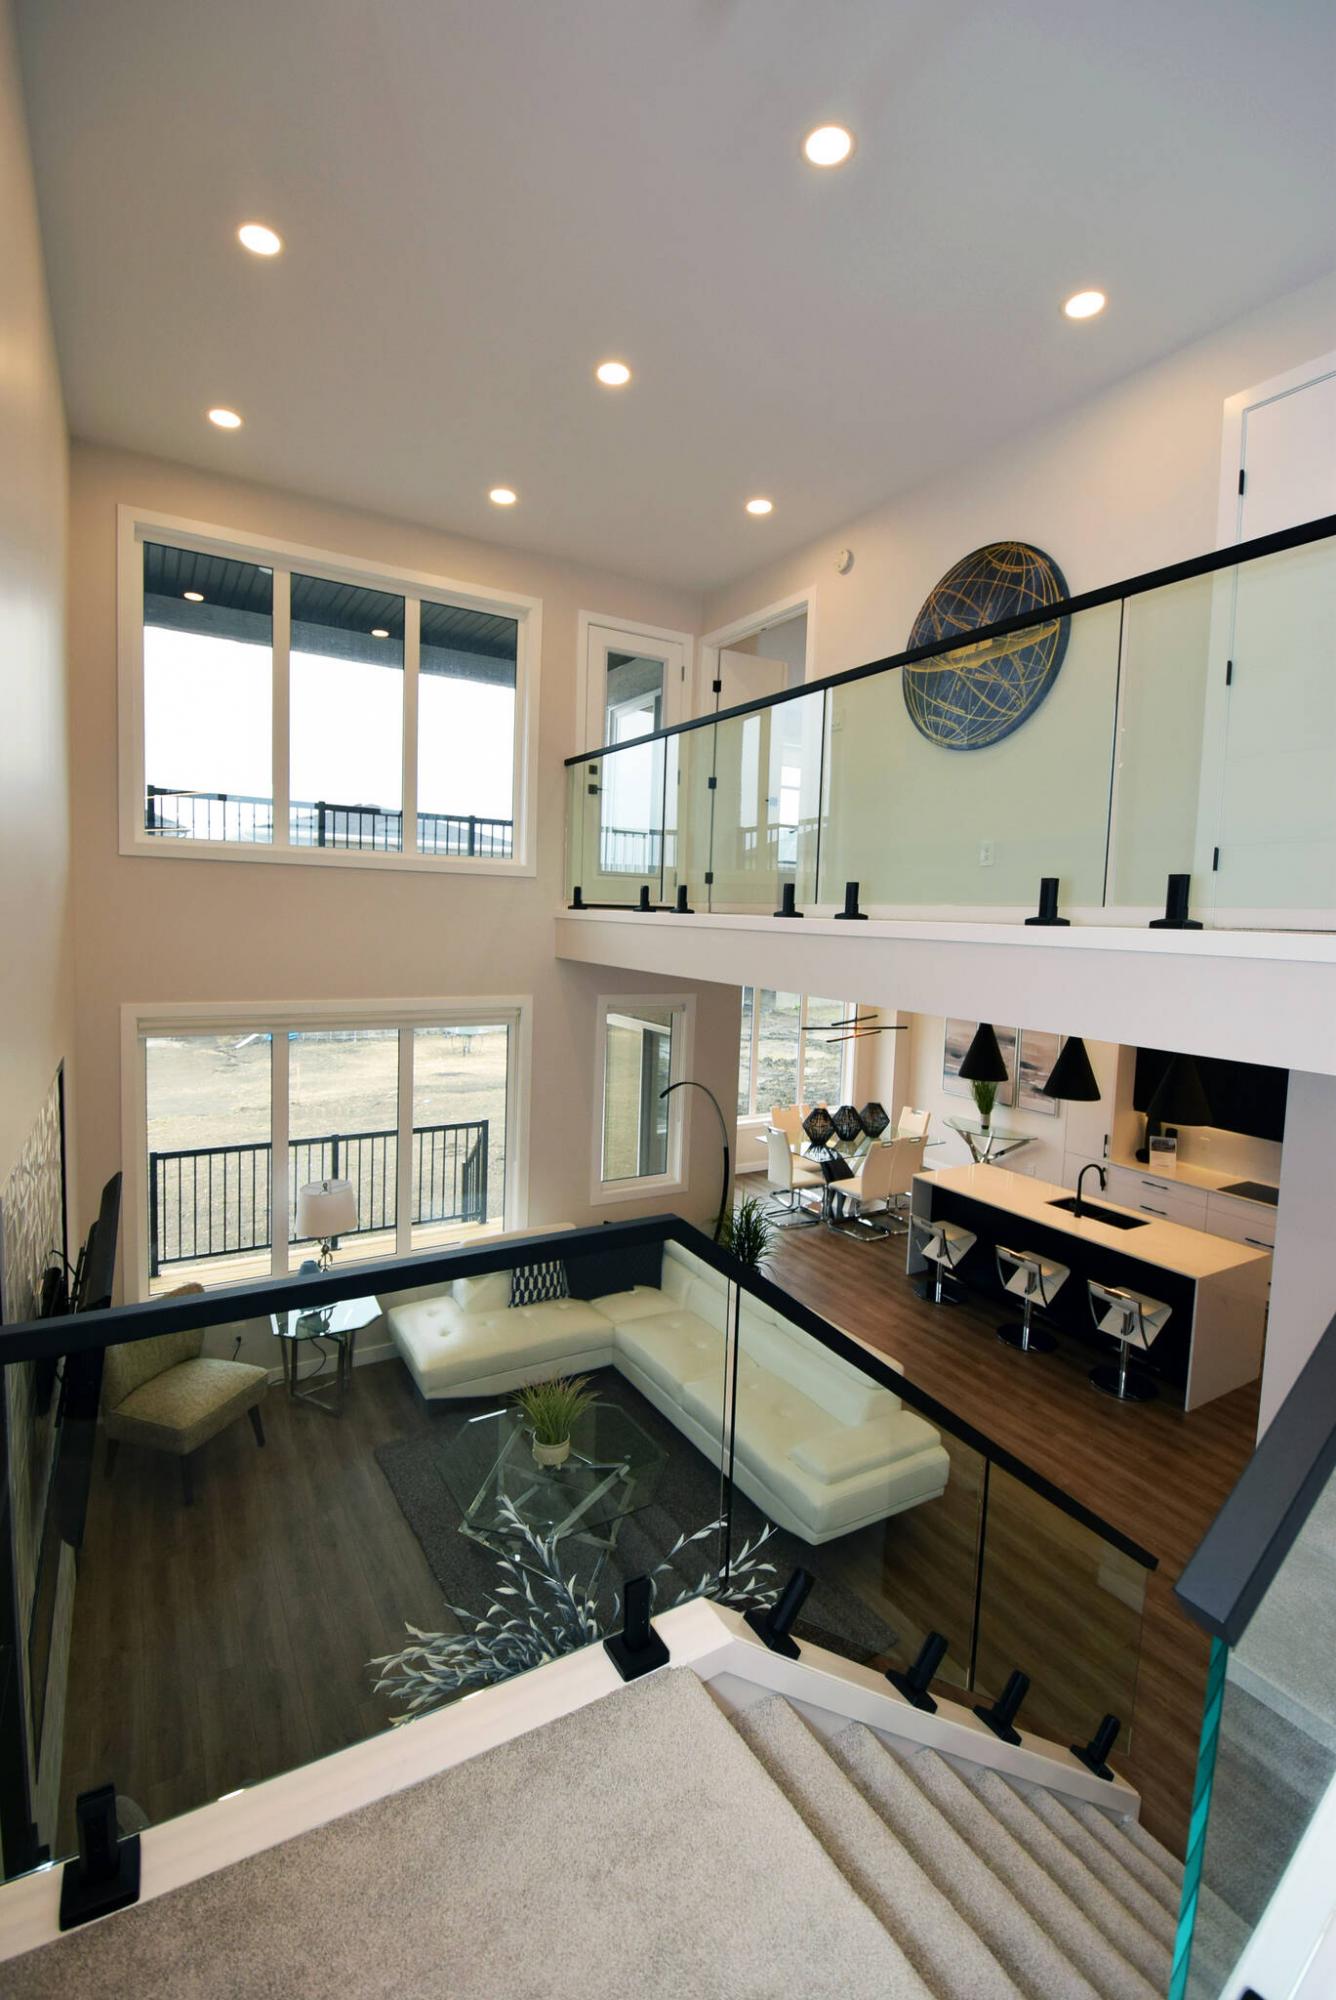 <p>Todd Lewys / Winnipeg Free Press</p><p>The view down to the main living area from the glass-bordered upper level staircase in this Prairie Pointe home is simply stunning.</p>